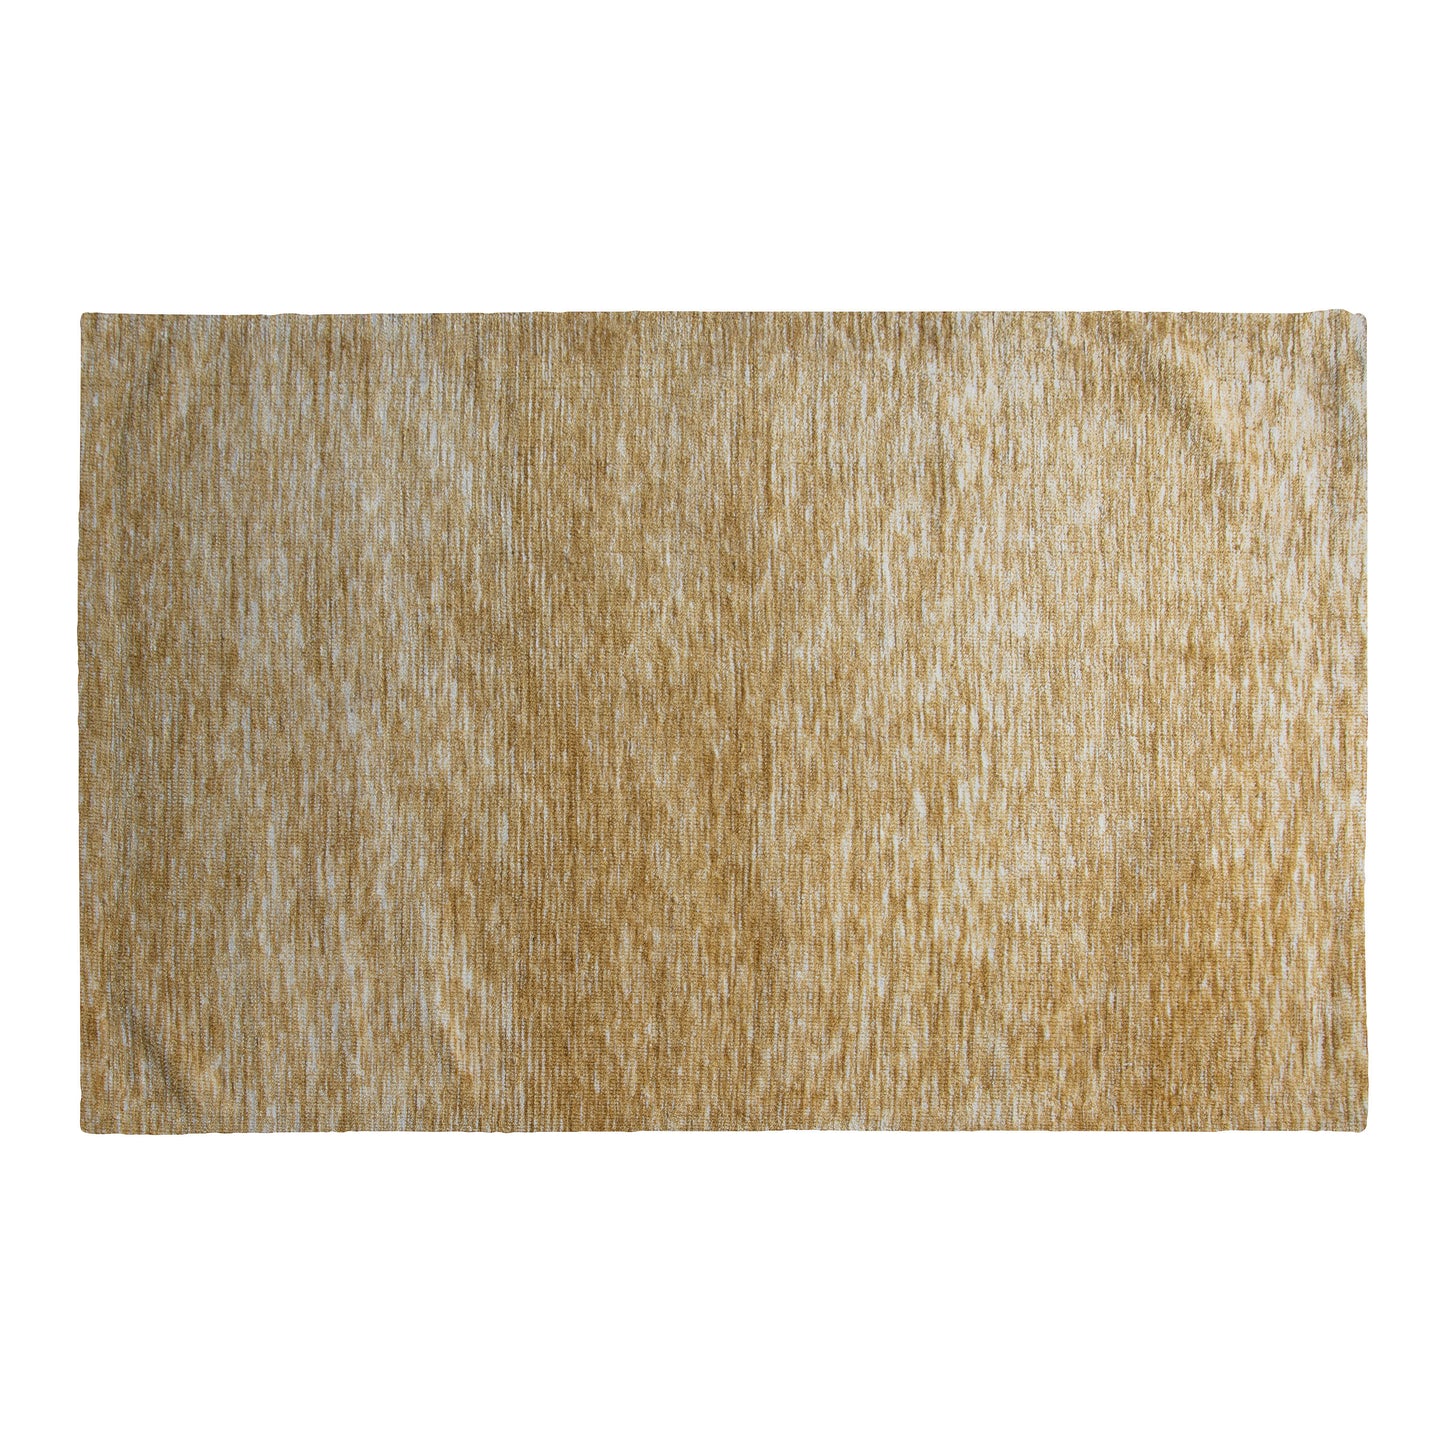 A textured Ochre Rug from Kikiathome.co.uk for home interior decor.